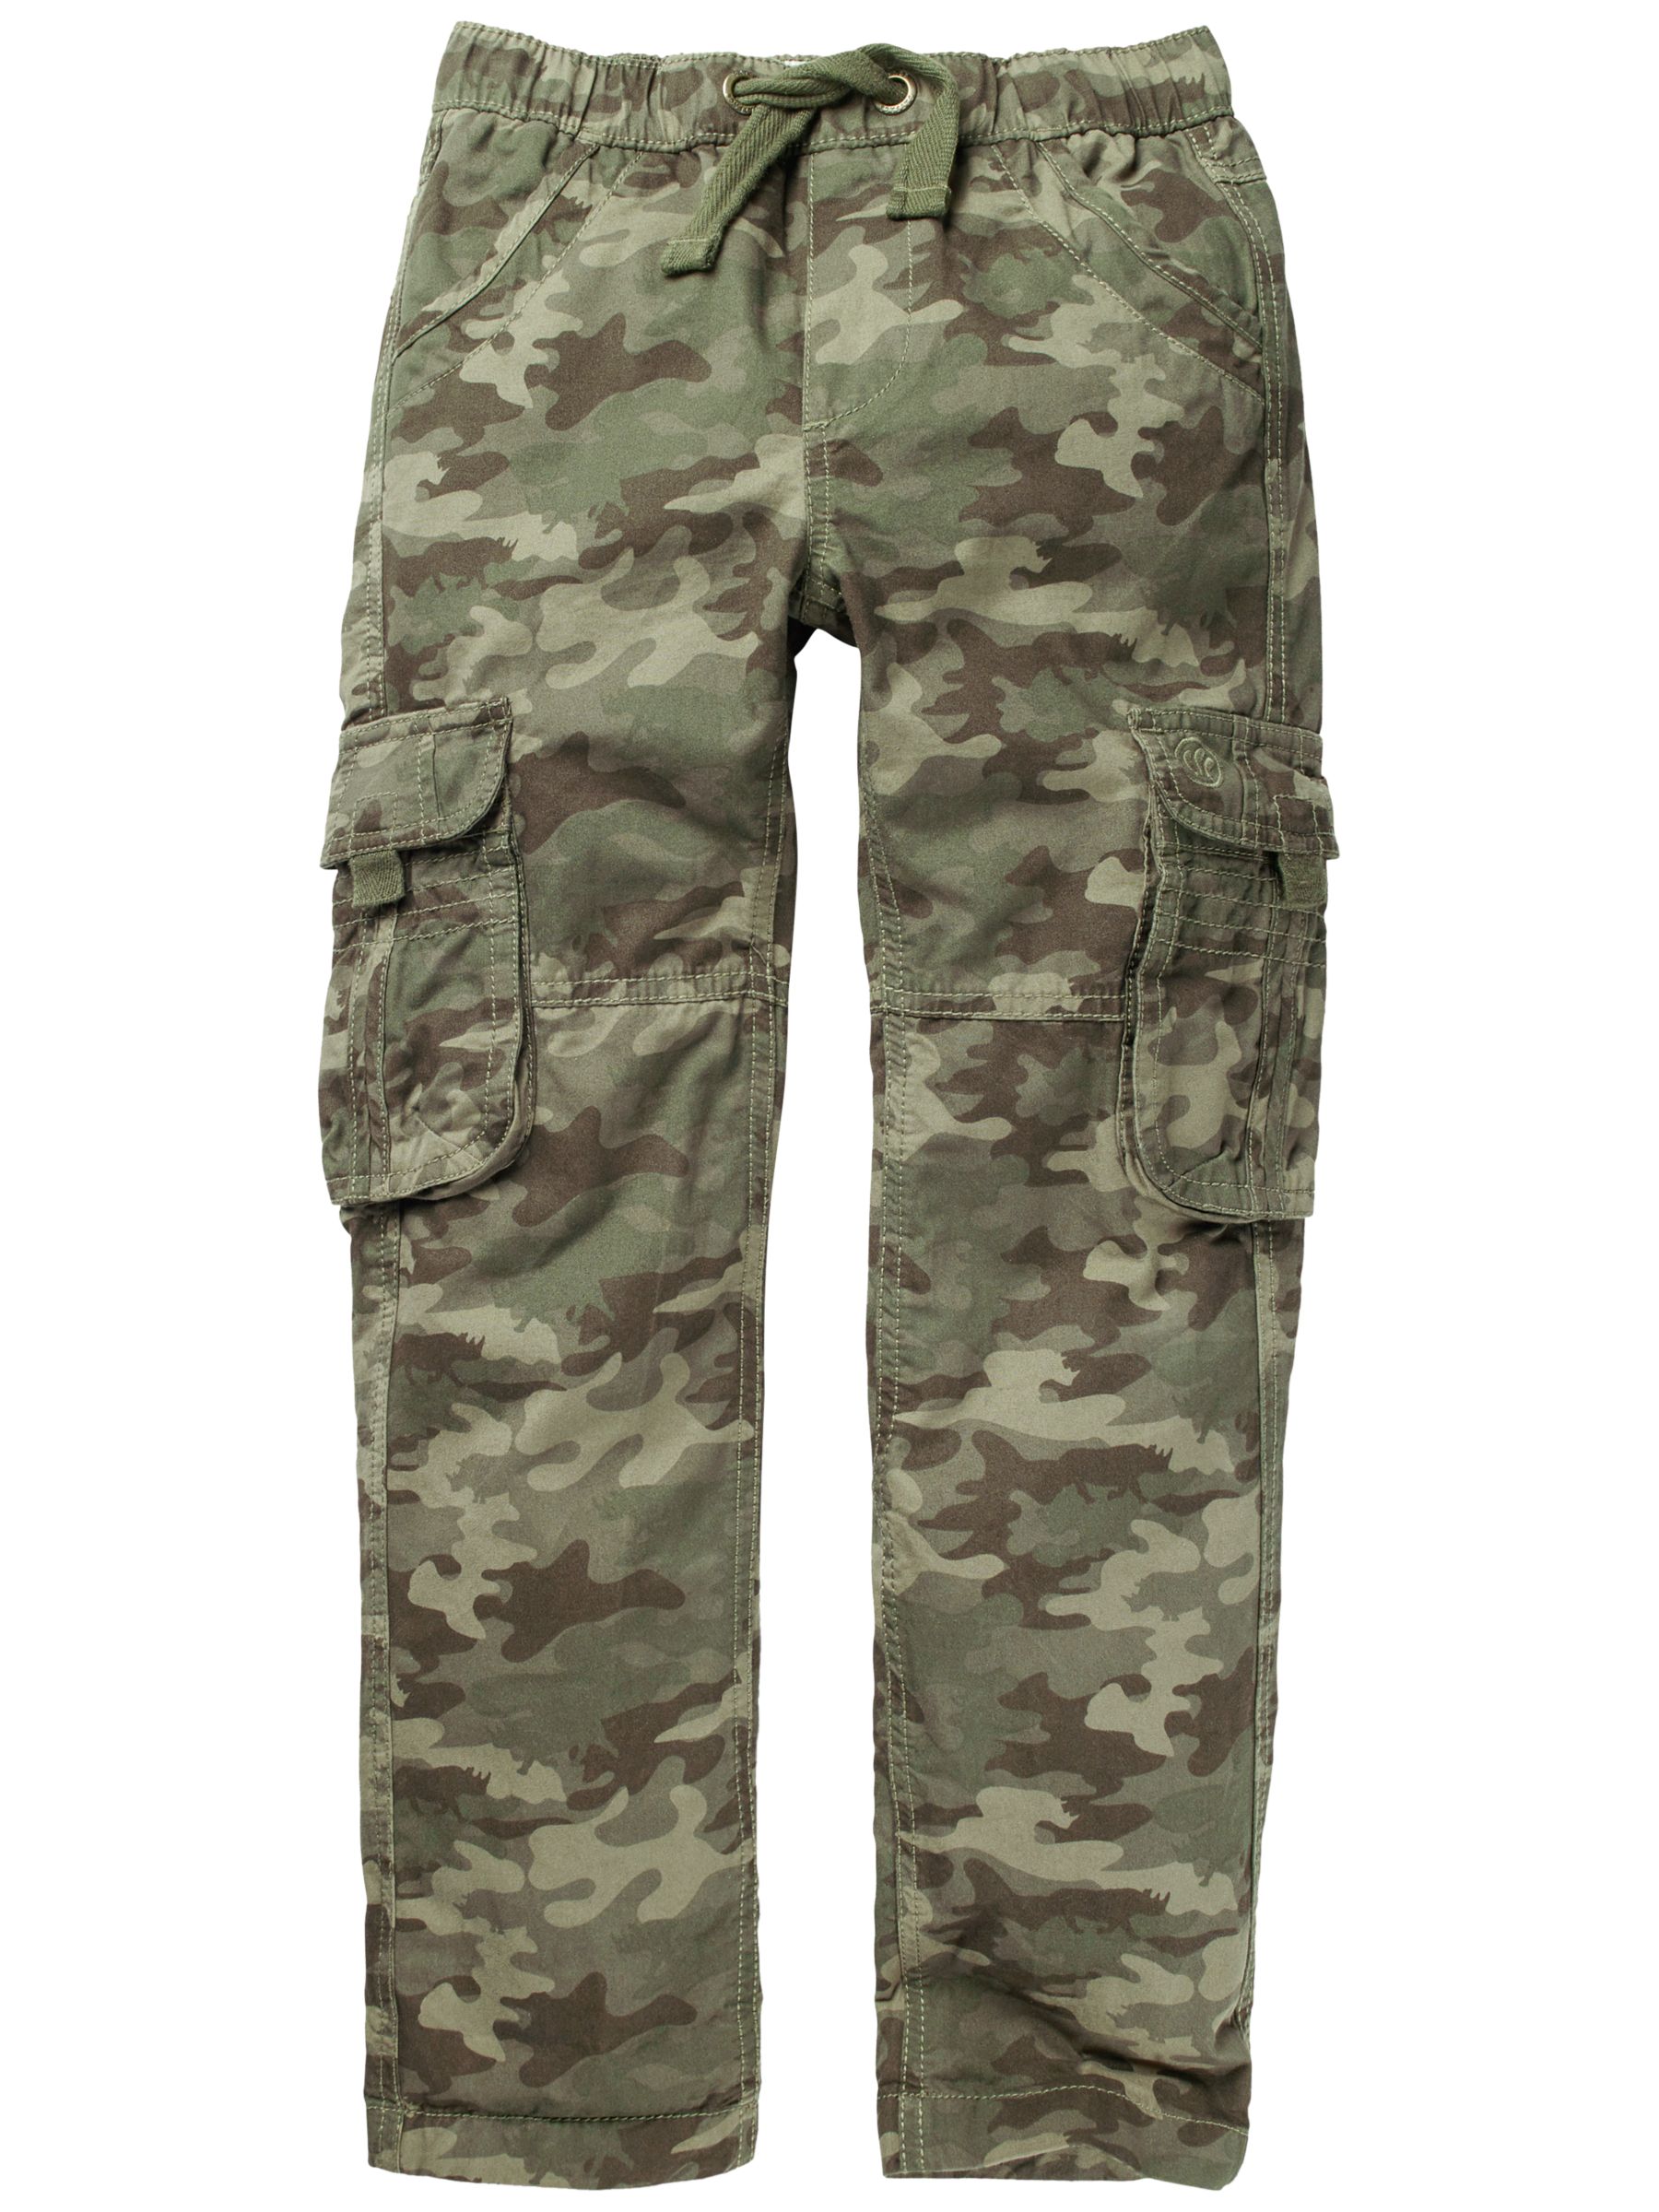 camouflage pants for boys